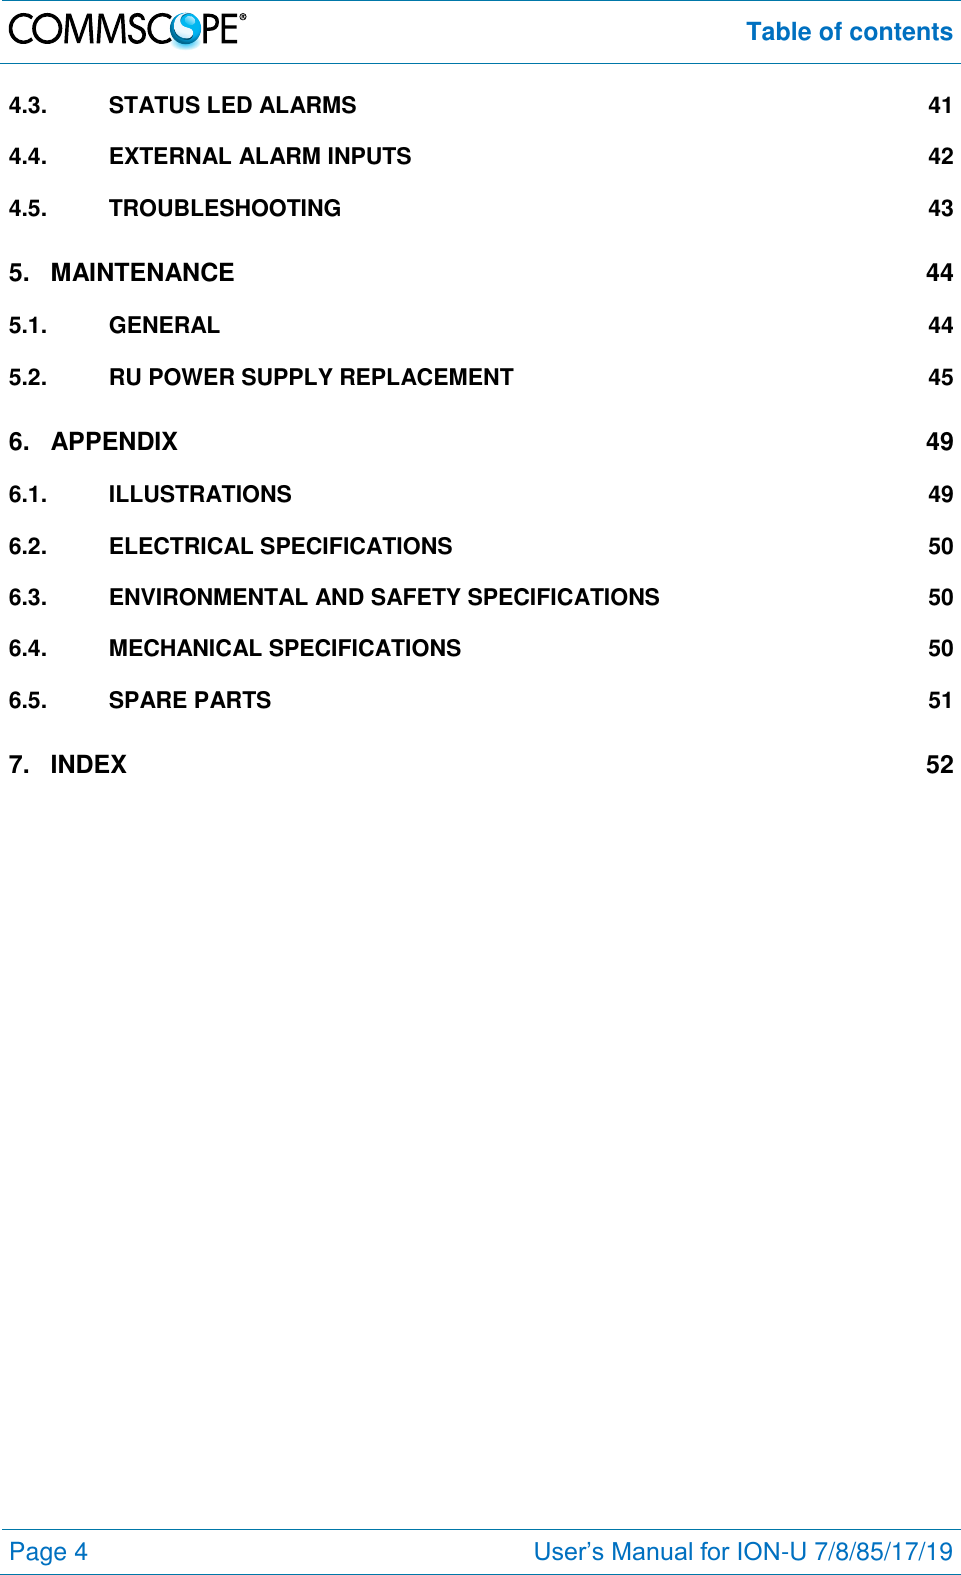  Table of contents  Page 4 User’s Manual for ION-U 7/8/85/17/19  4.3. STATUS LED ALARMS  41 4.4. EXTERNAL ALARM INPUTS  42 4.5. TROUBLESHOOTING  43 5. MAINTENANCE  44 5.1. GENERAL  44 5.2. RU POWER SUPPLY REPLACEMENT  45 6. APPENDIX  49 6.1. ILLUSTRATIONS  49 6.2. ELECTRICAL SPECIFICATIONS  50 6.3. ENVIRONMENTAL AND SAFETY SPECIFICATIONS  50 6.4. MECHANICAL SPECIFICATIONS  50 6.5. SPARE PARTS  51 7. INDEX  52  